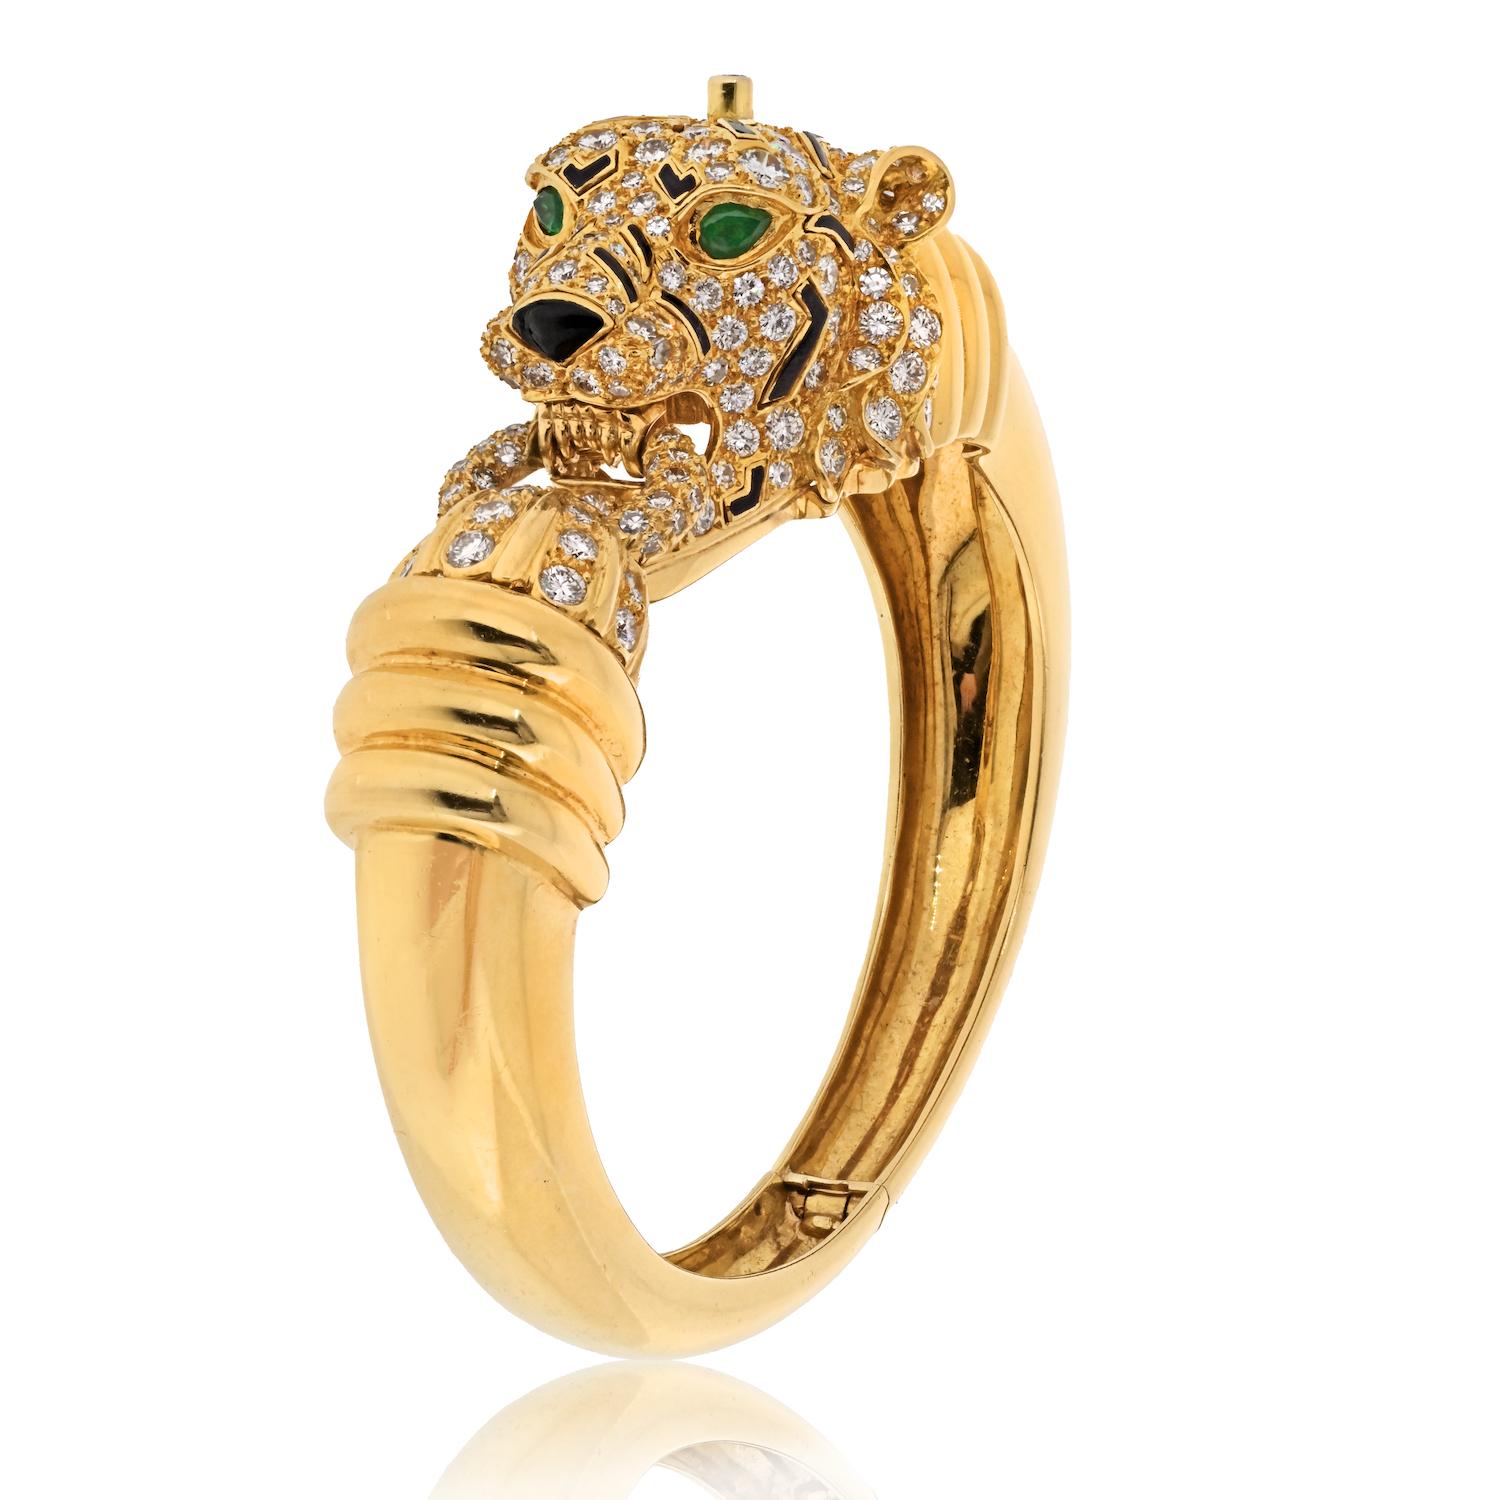 Step into the wild with the David Webb 18K Yellow Gold Diamond Tiger Animal Bangle, a mesmerizing piece that captures the essence of the jungle with its tiger-inspired design and luxurious detailing.

**Key Features:**

1. **Material:**
   - Crafted